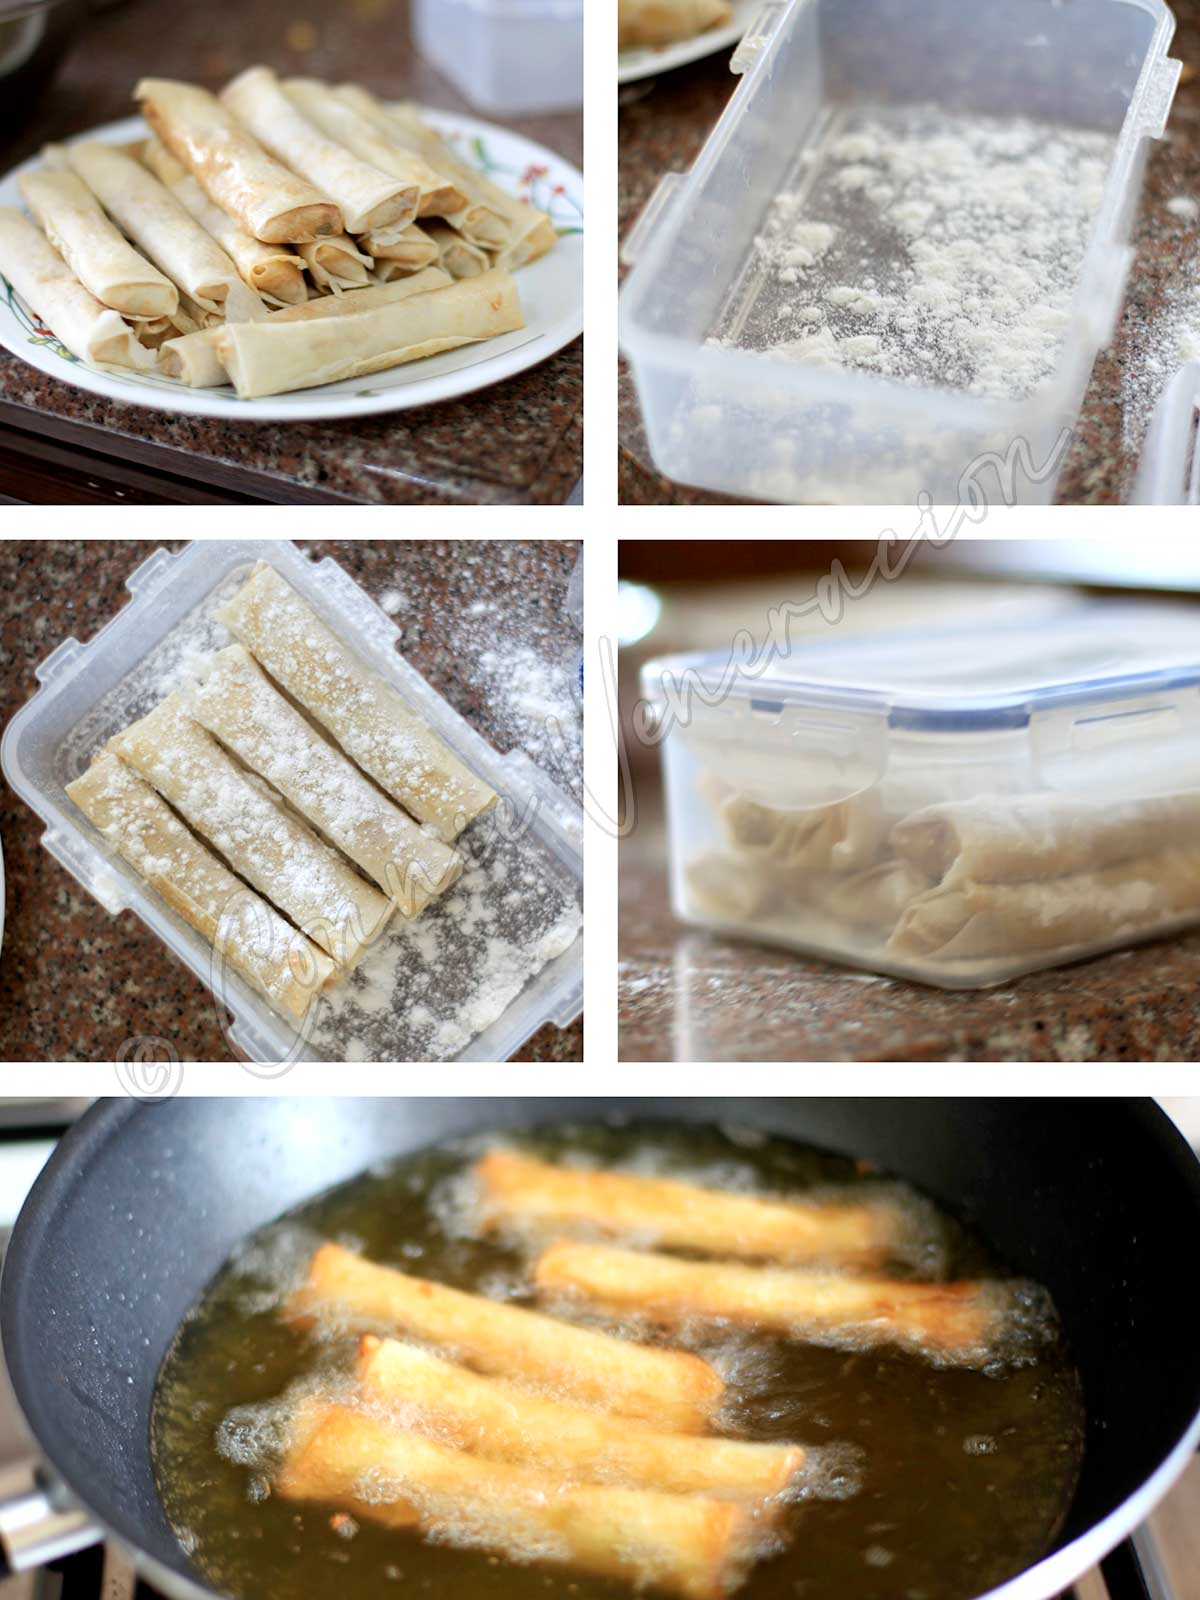 How to store uncooked spring rolls